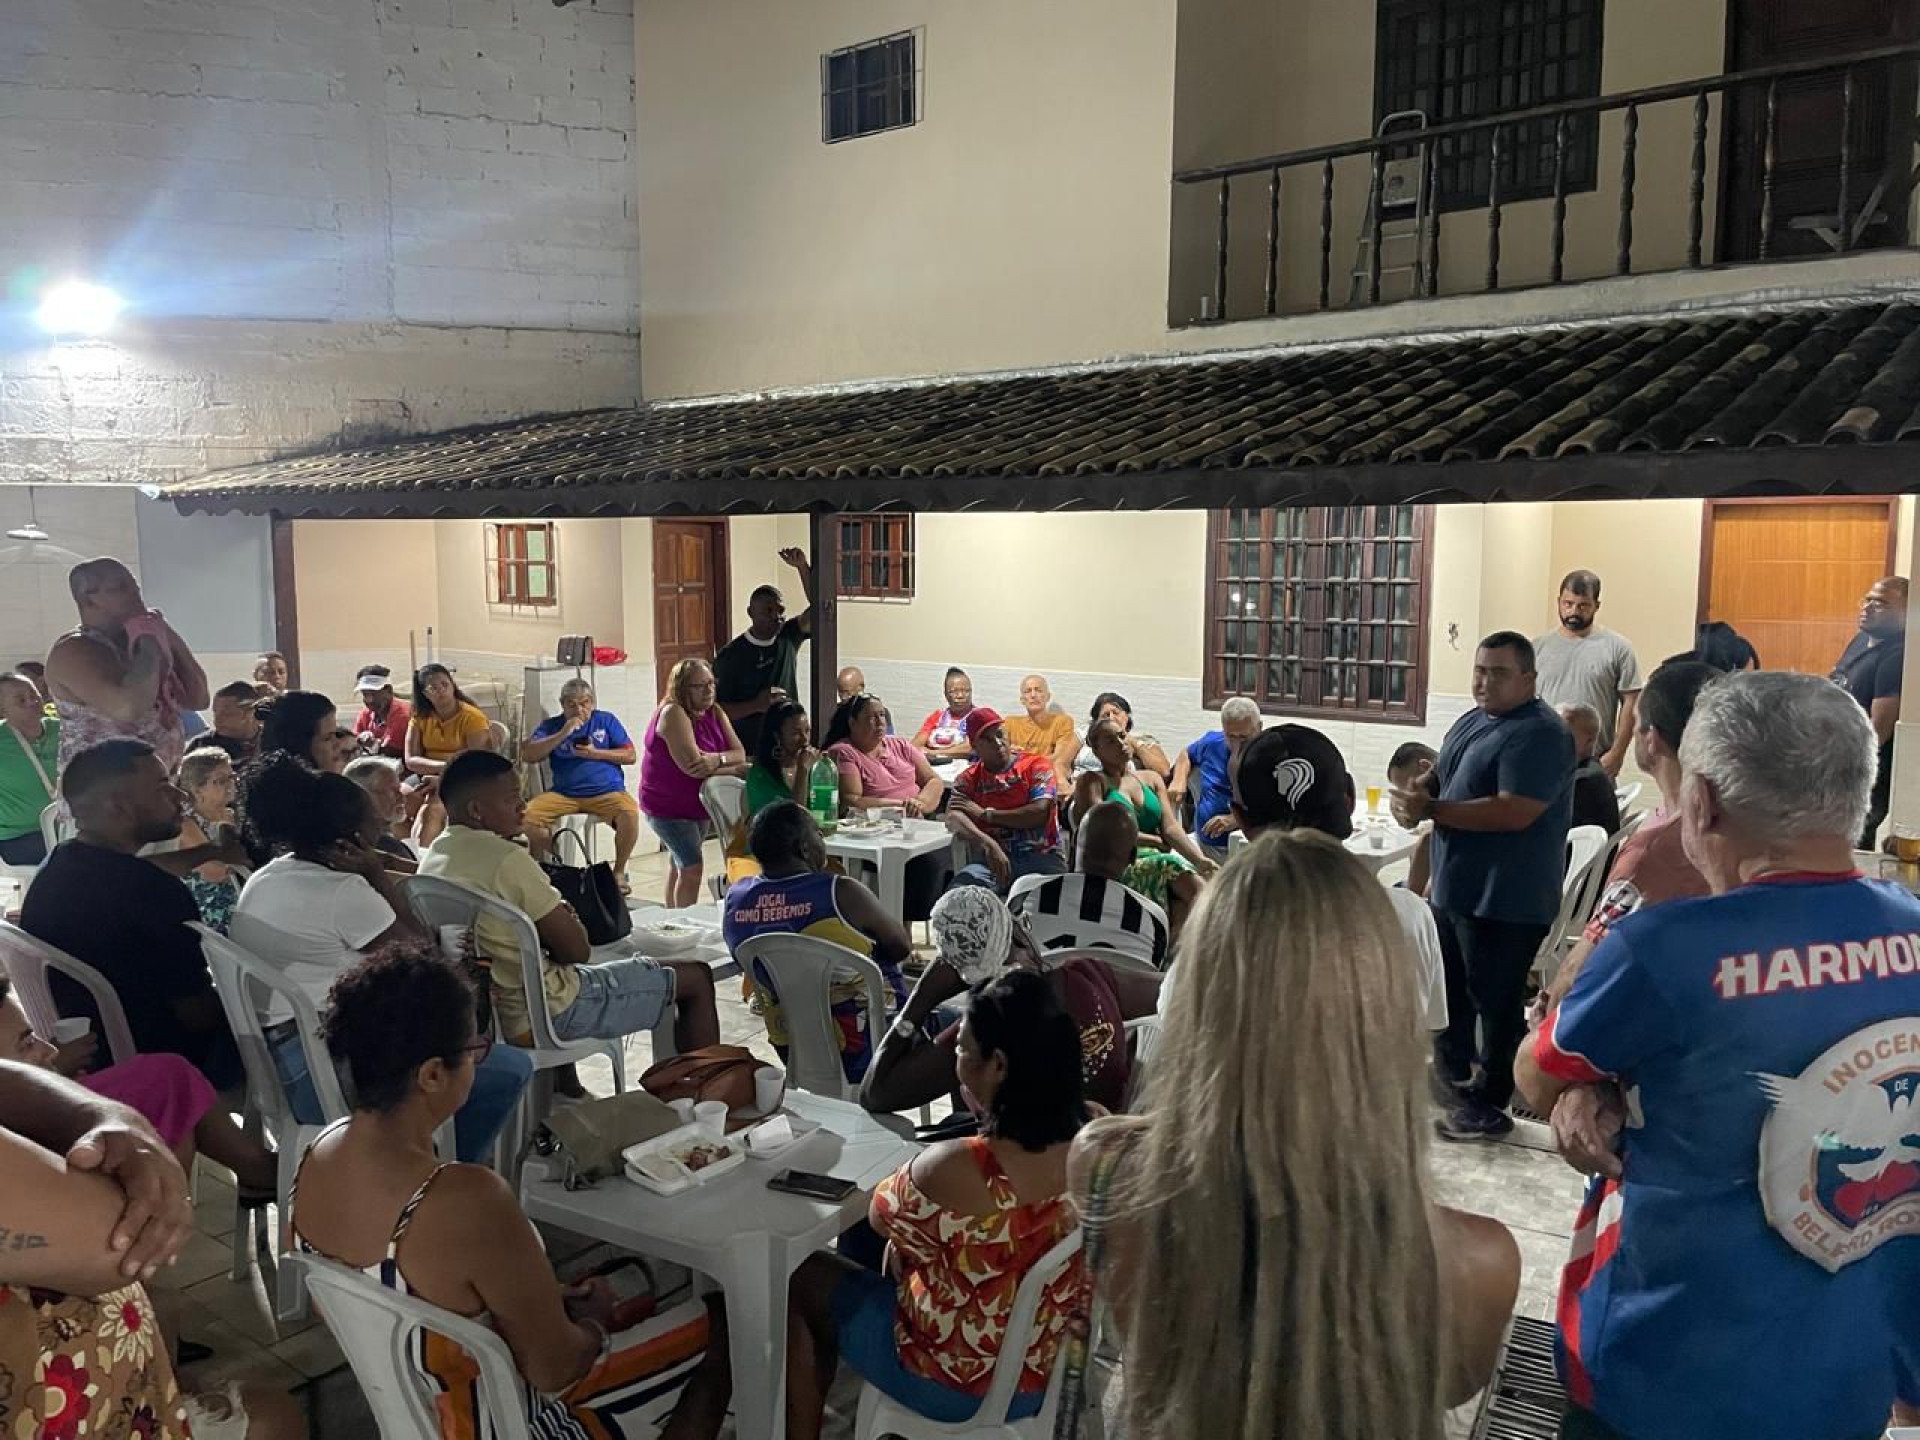 Board of Inocentes de Belford Roxo met to outline the first commitments for Carnival 2025 - Disclosure